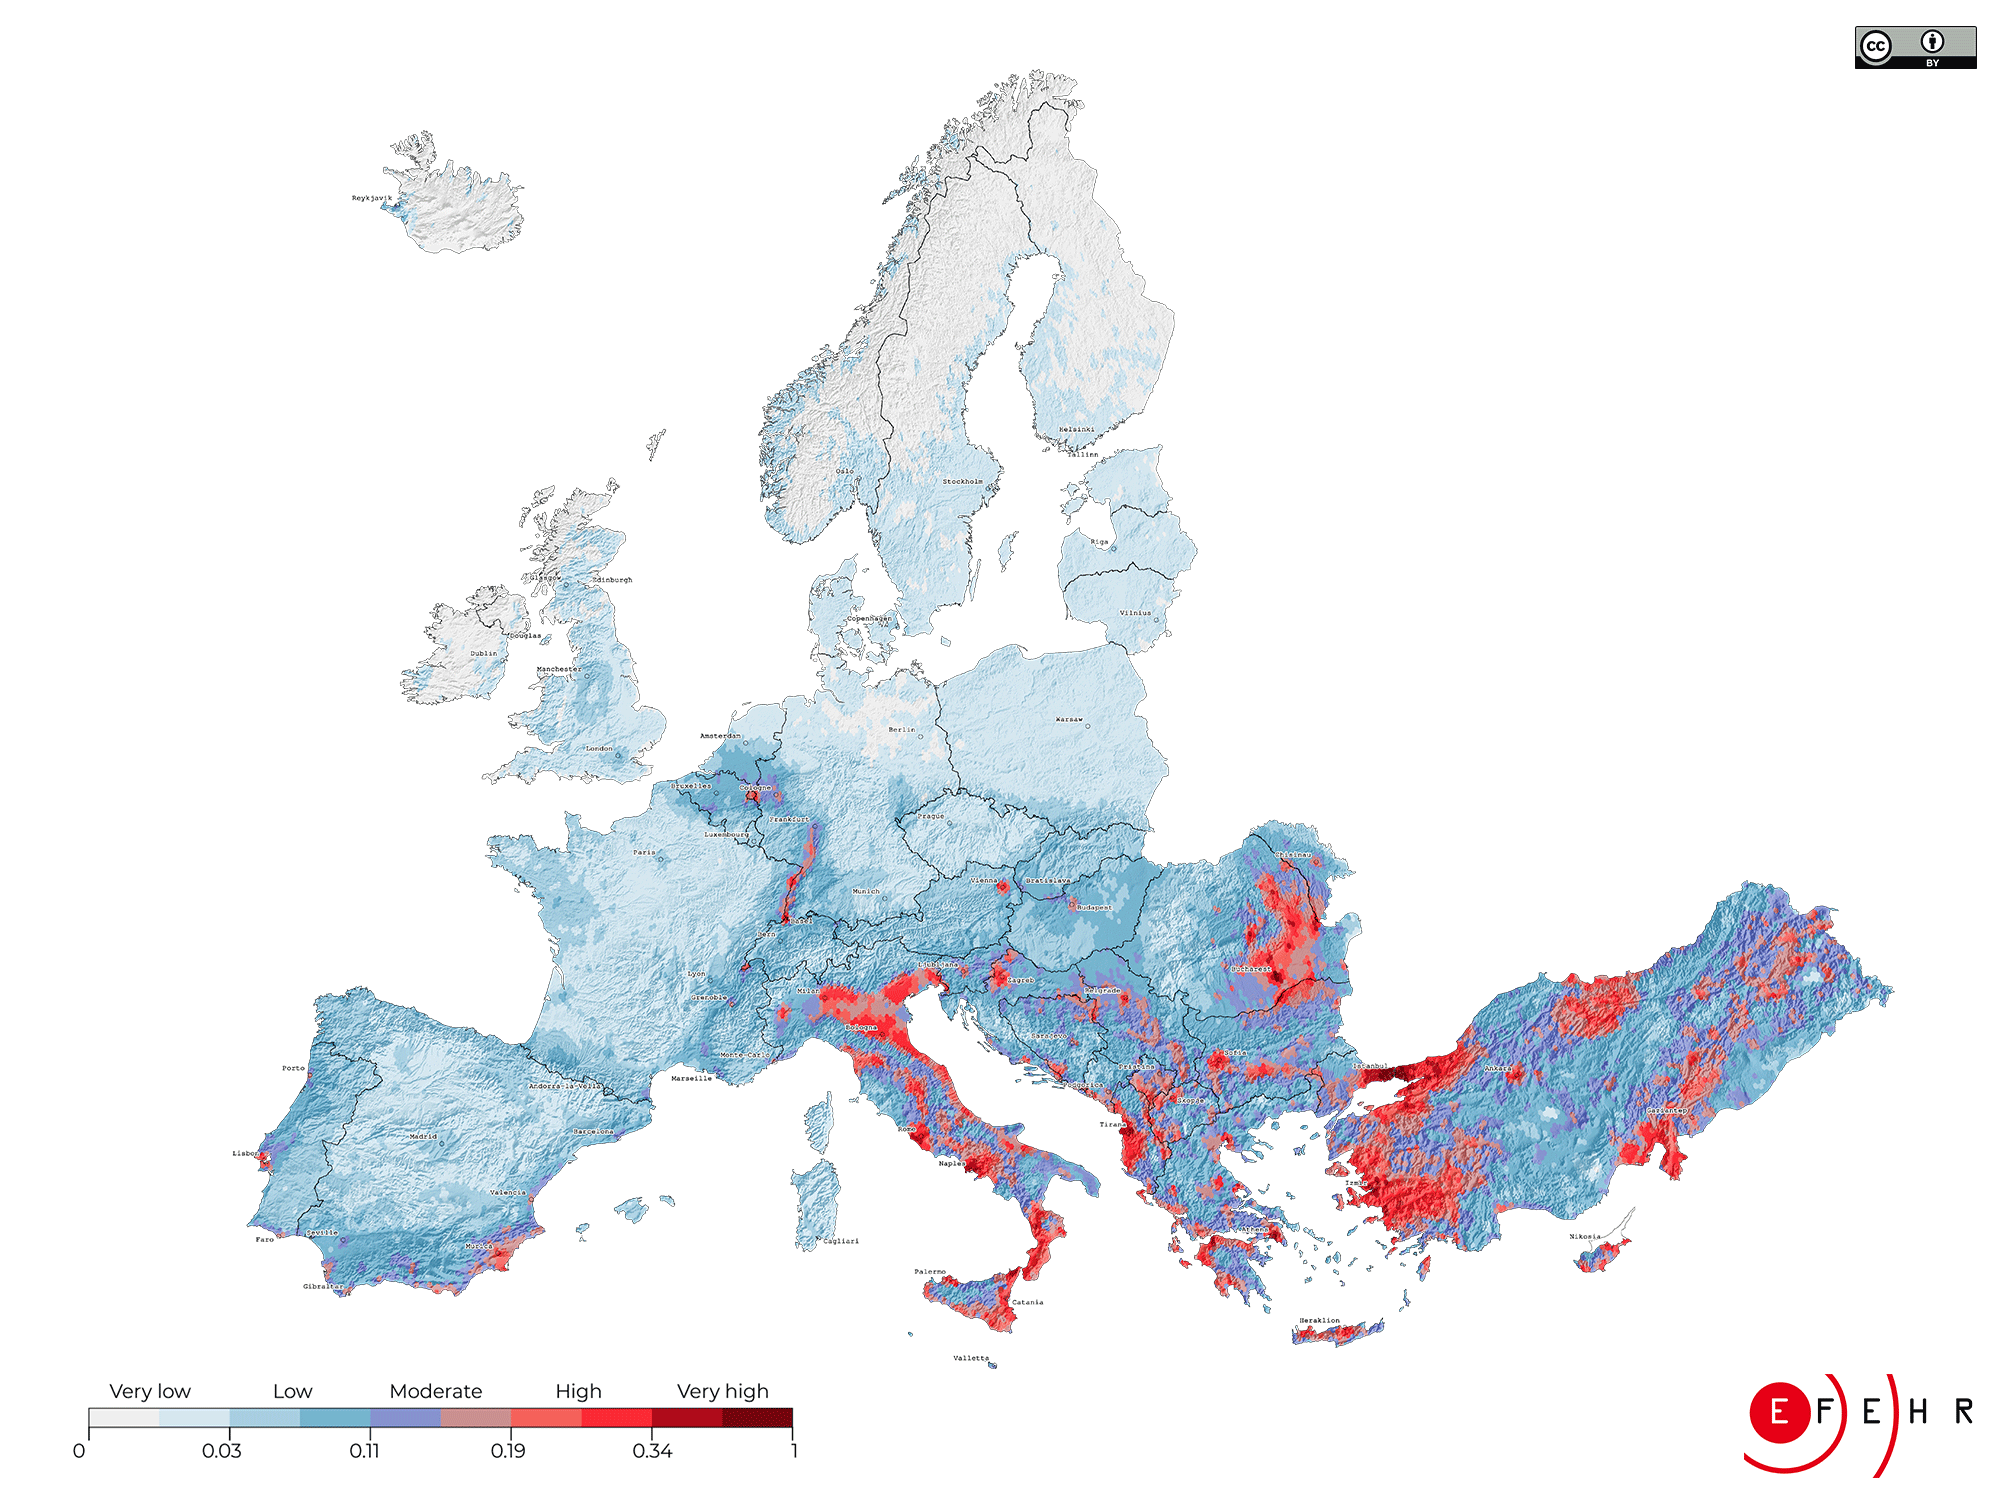 The earthquake risk map of Europe